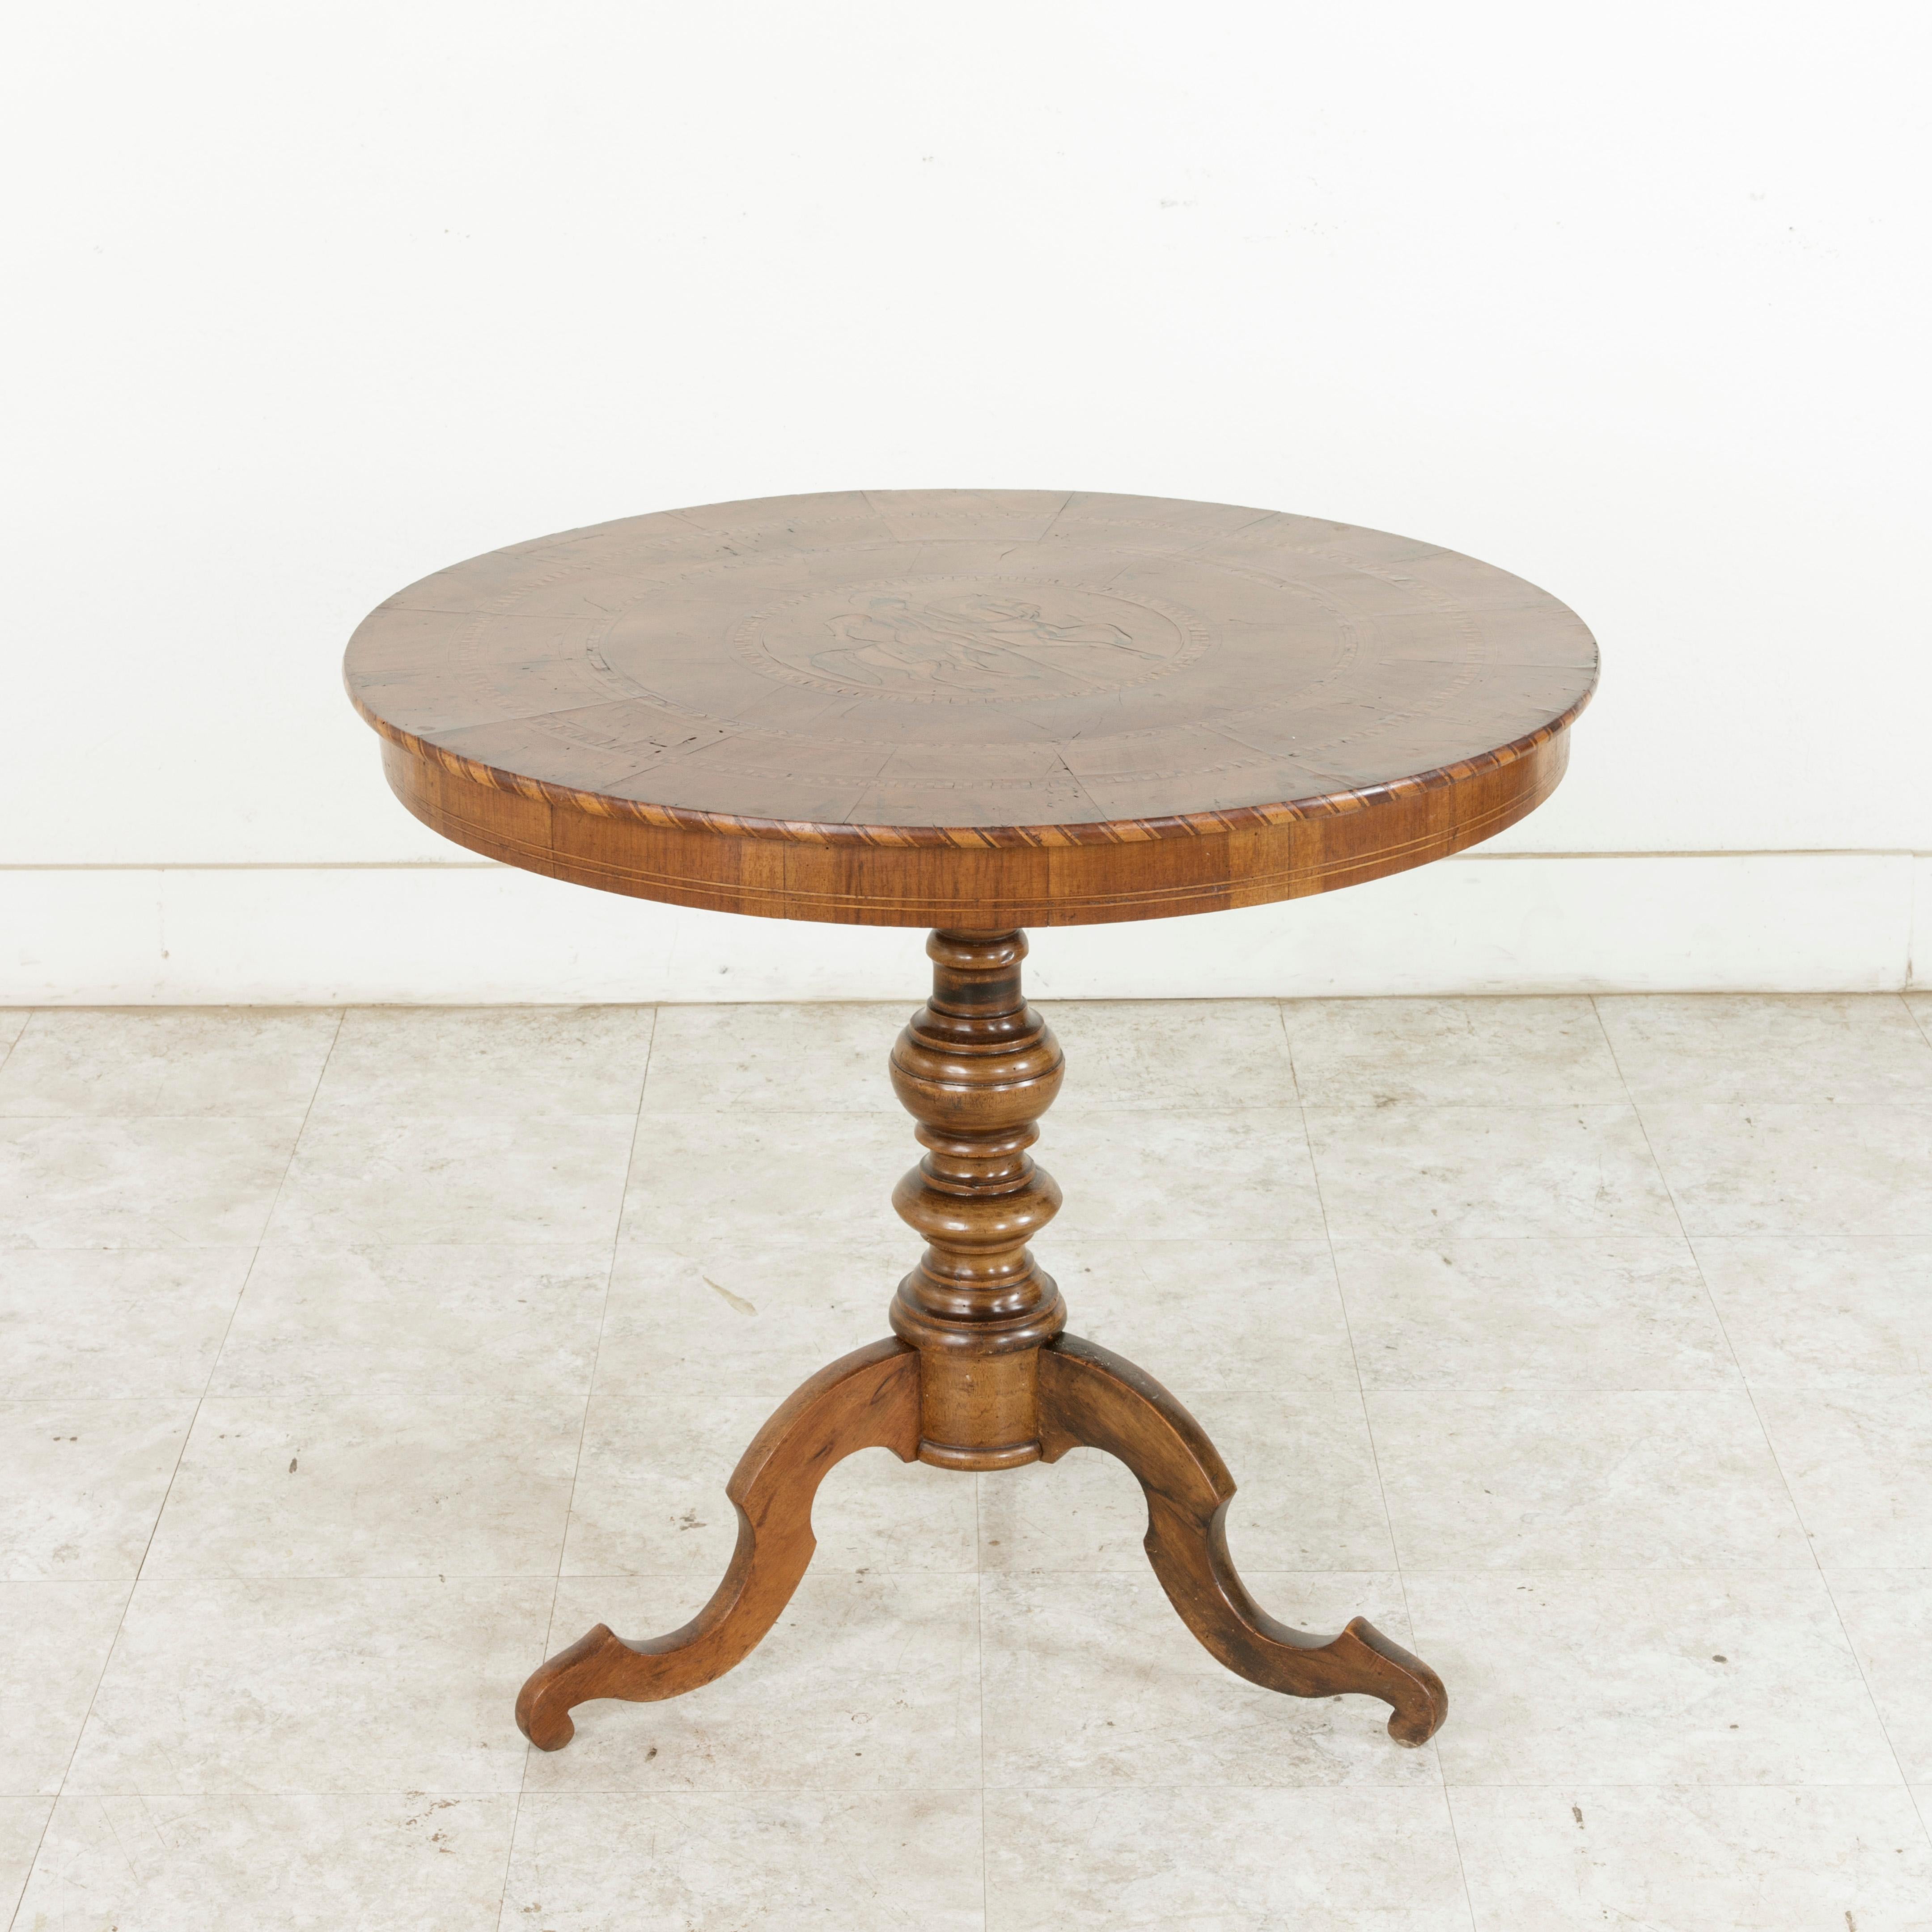 This Italian gueridon or pedestal table from the late nineteenth century features a walnut and lemon wood marquetry top with a central inlaid cavalier on horseback brandishing a lance. Concentric borders of chevron and checkered patterns encircle